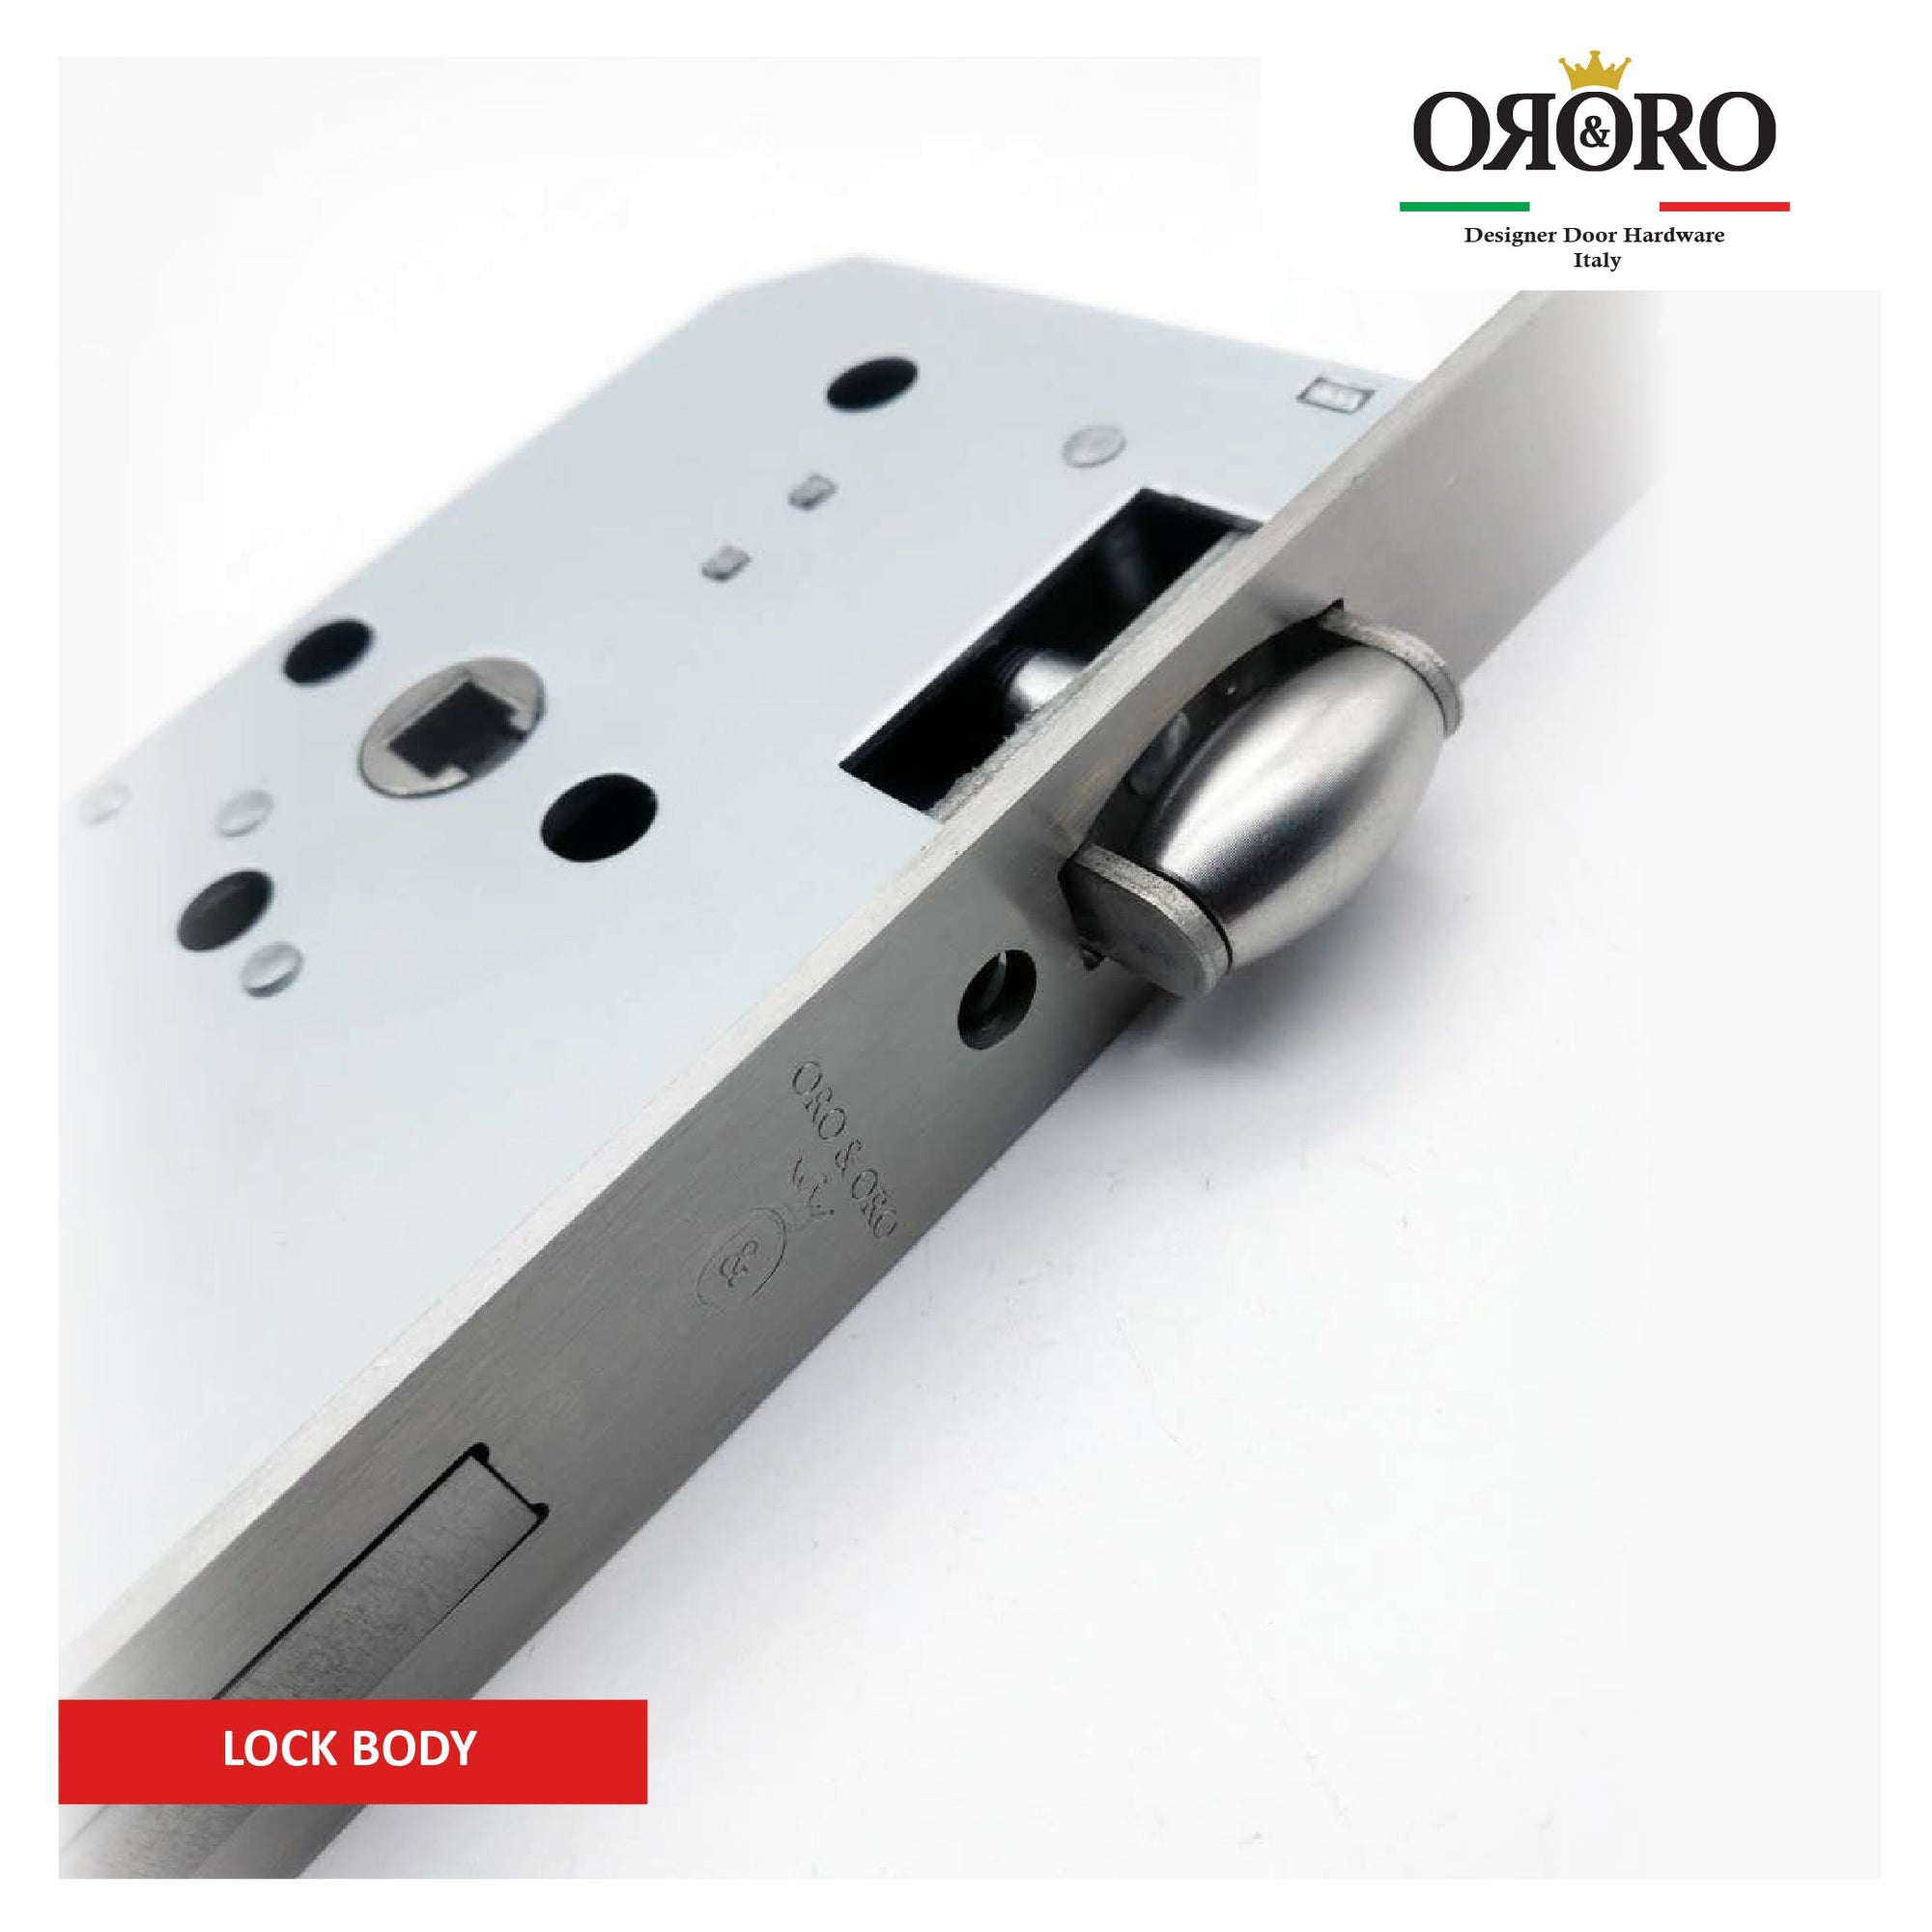 Oro & Oro Lock Body - Premium lock bodies for enhanced security and peace of mind.